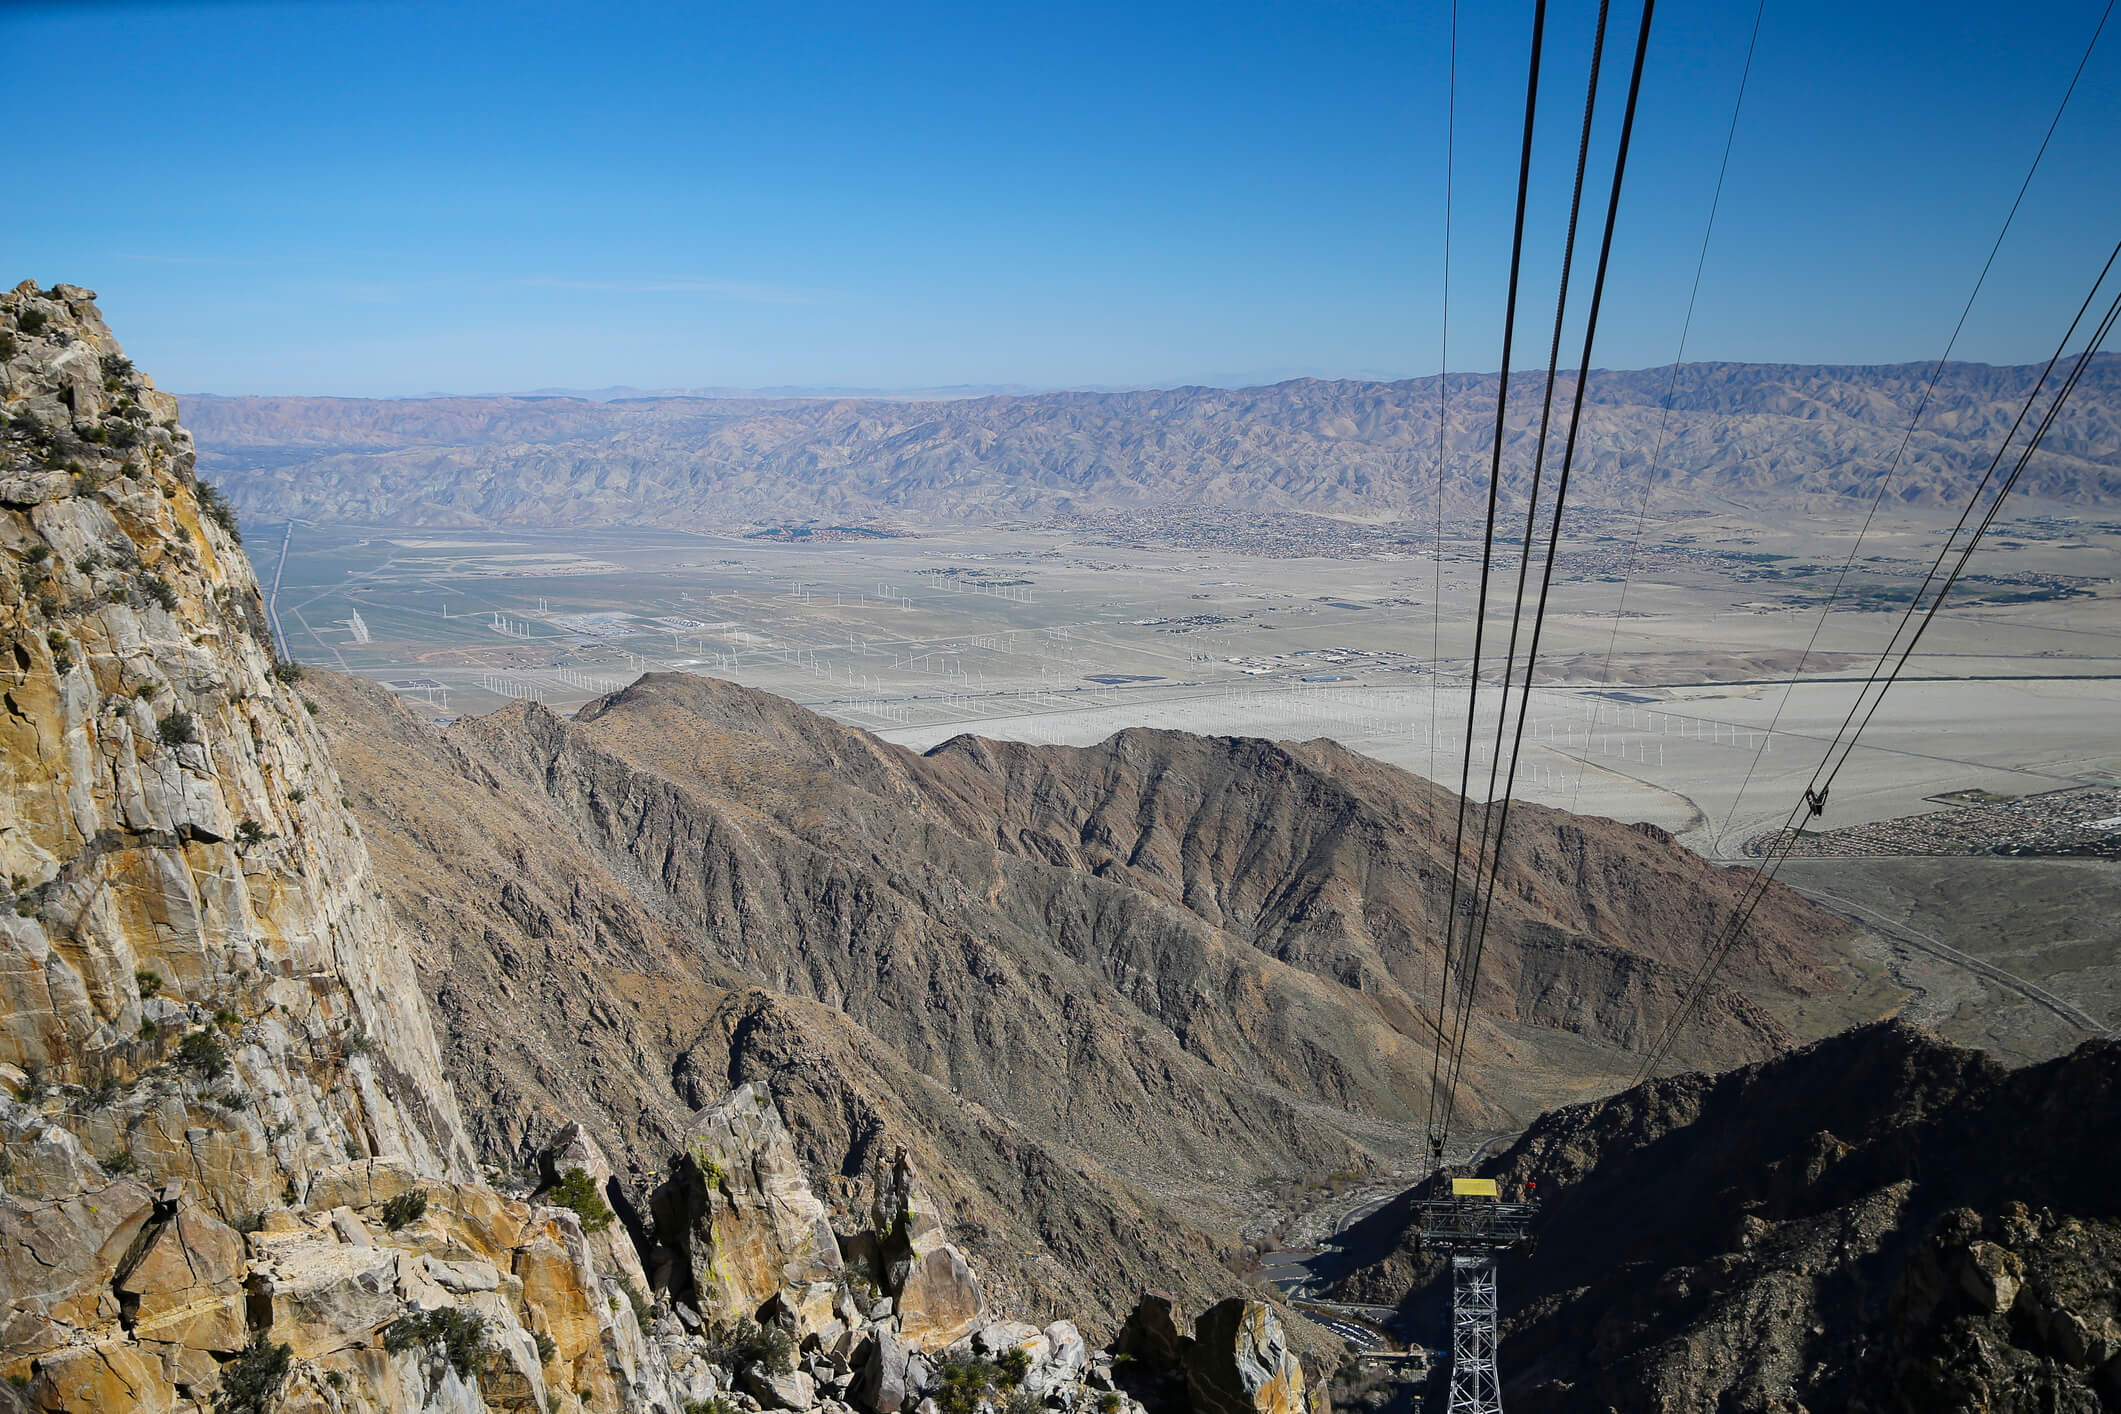 Tram Rail Lines and San Jacinto Mountains Viewed from Tram Perspective